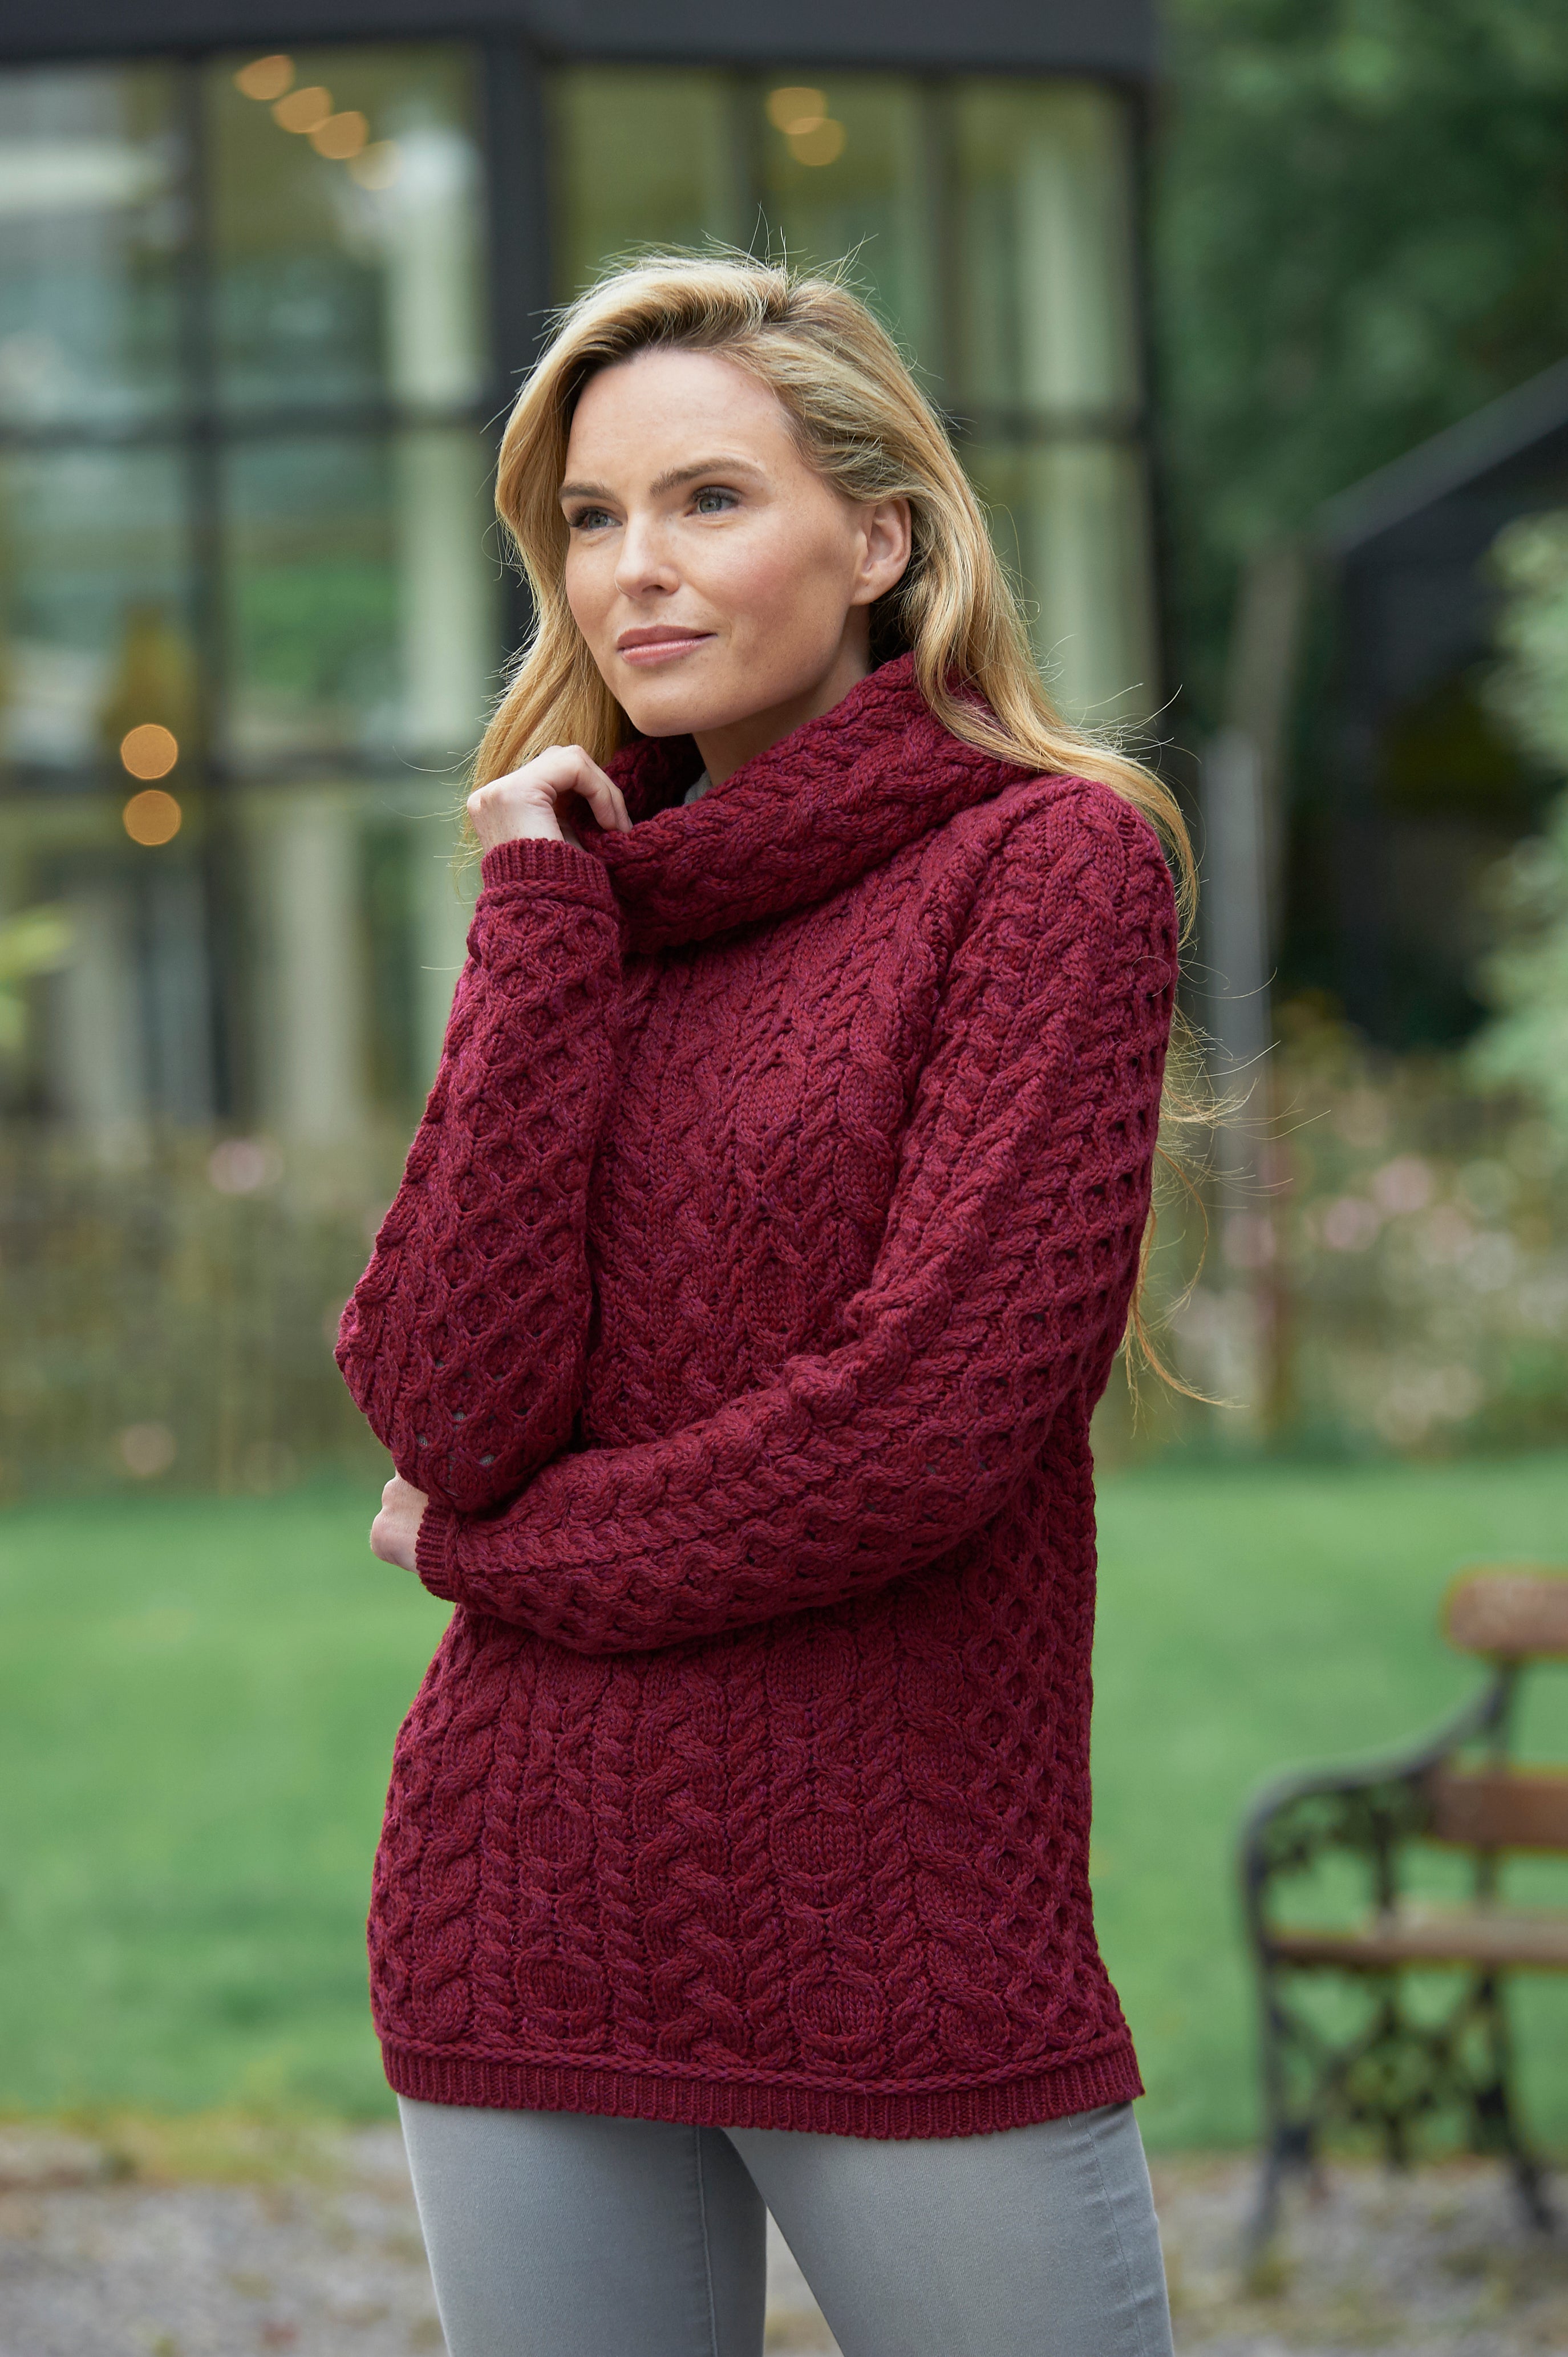 SUPER SOFT CABLE KNIT COWL NECK SWEATER - The Irish Celtic Craft Shop